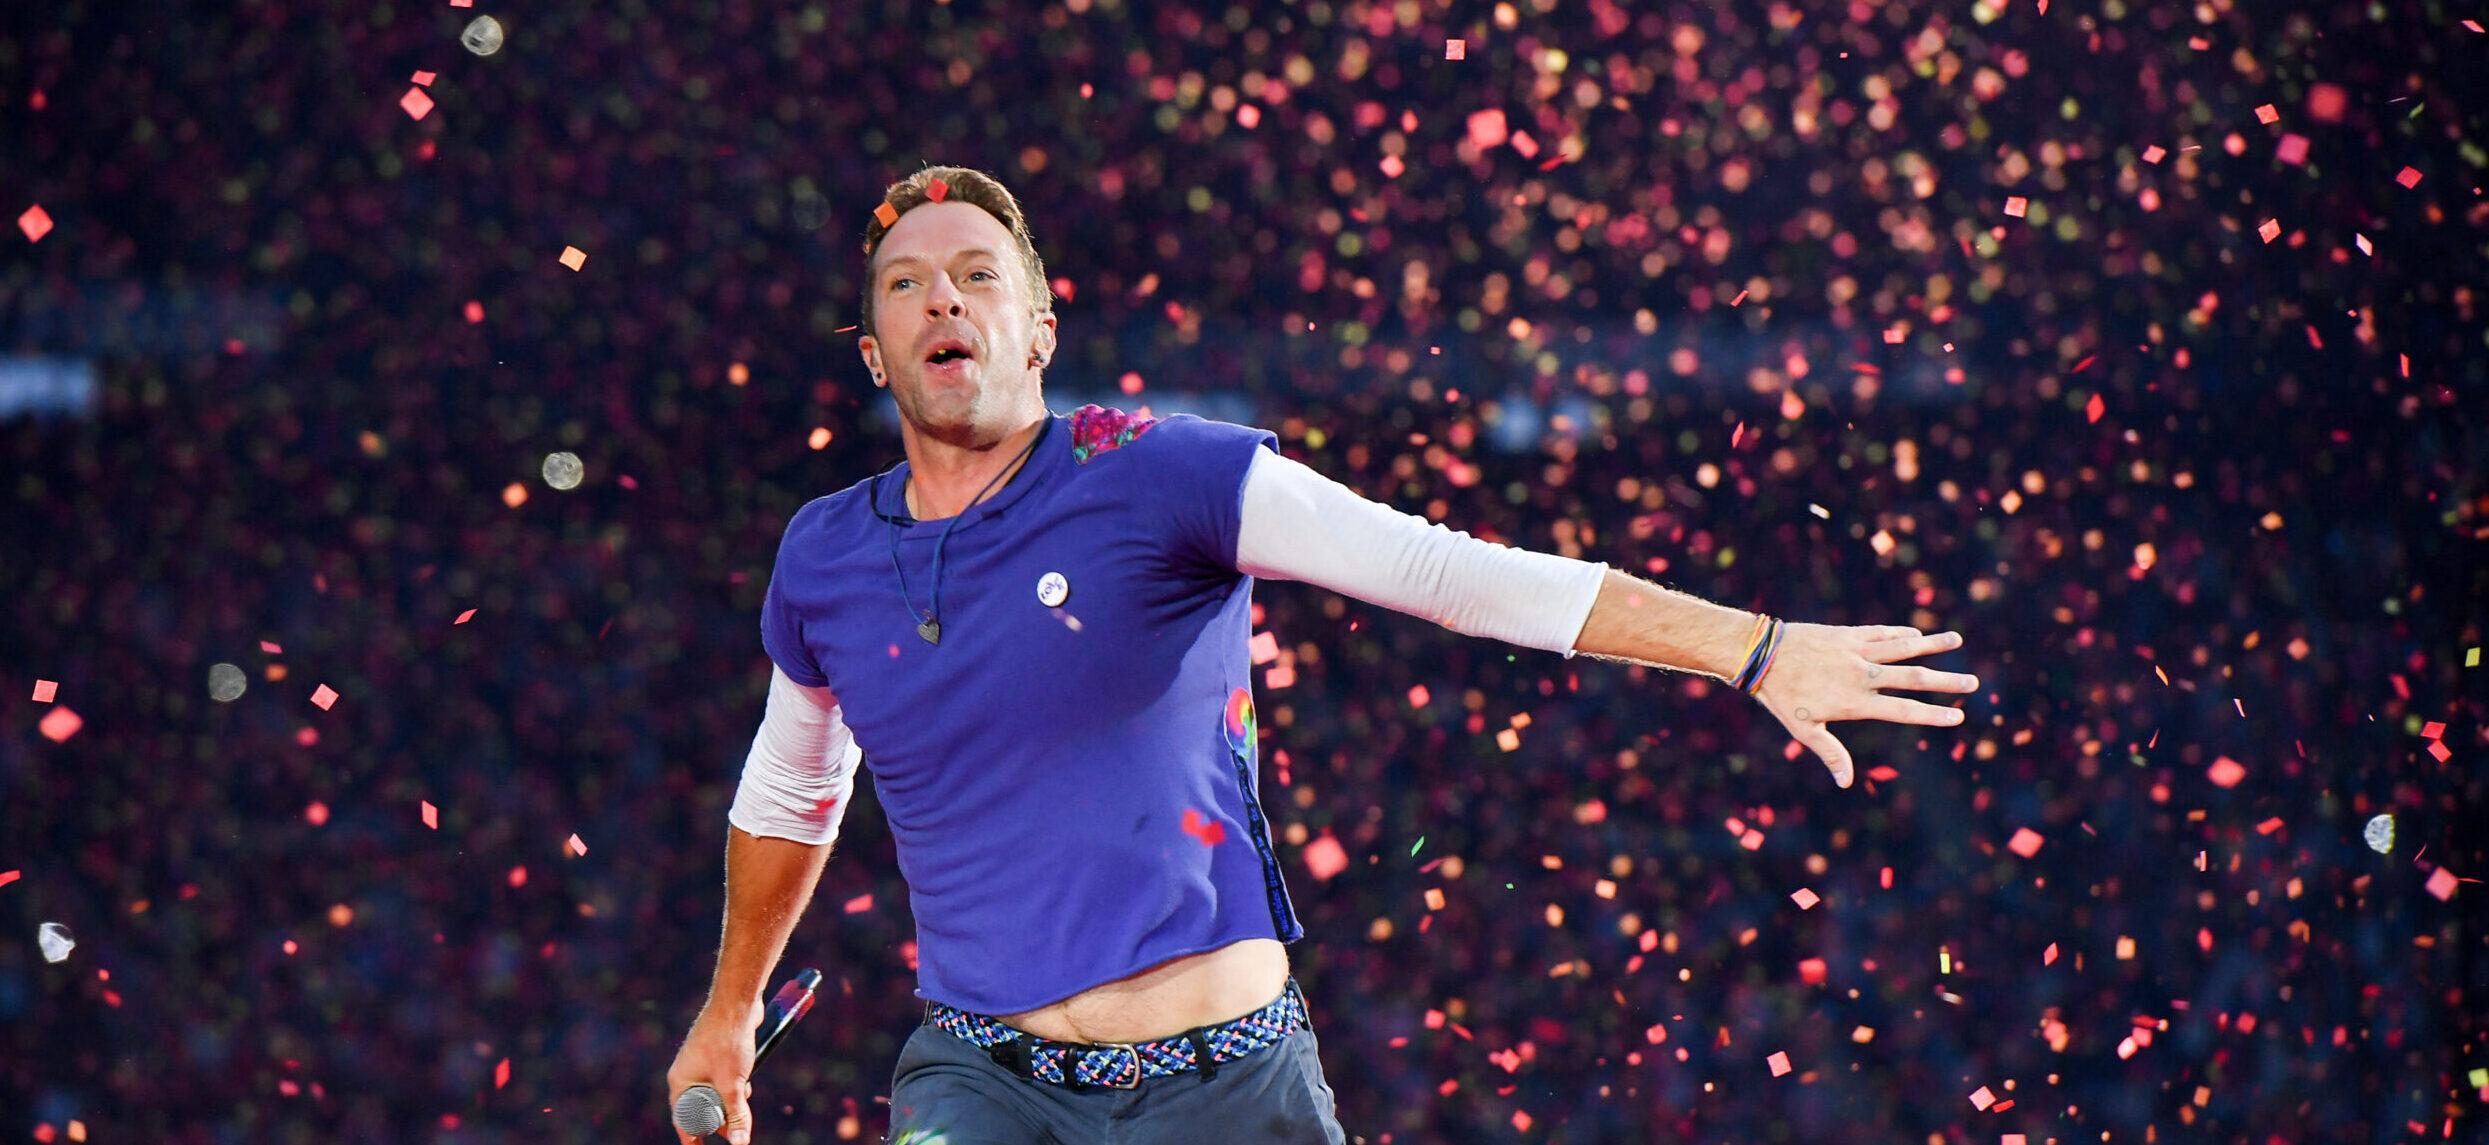 Chris Martin from Coldplay performs at Stade de France